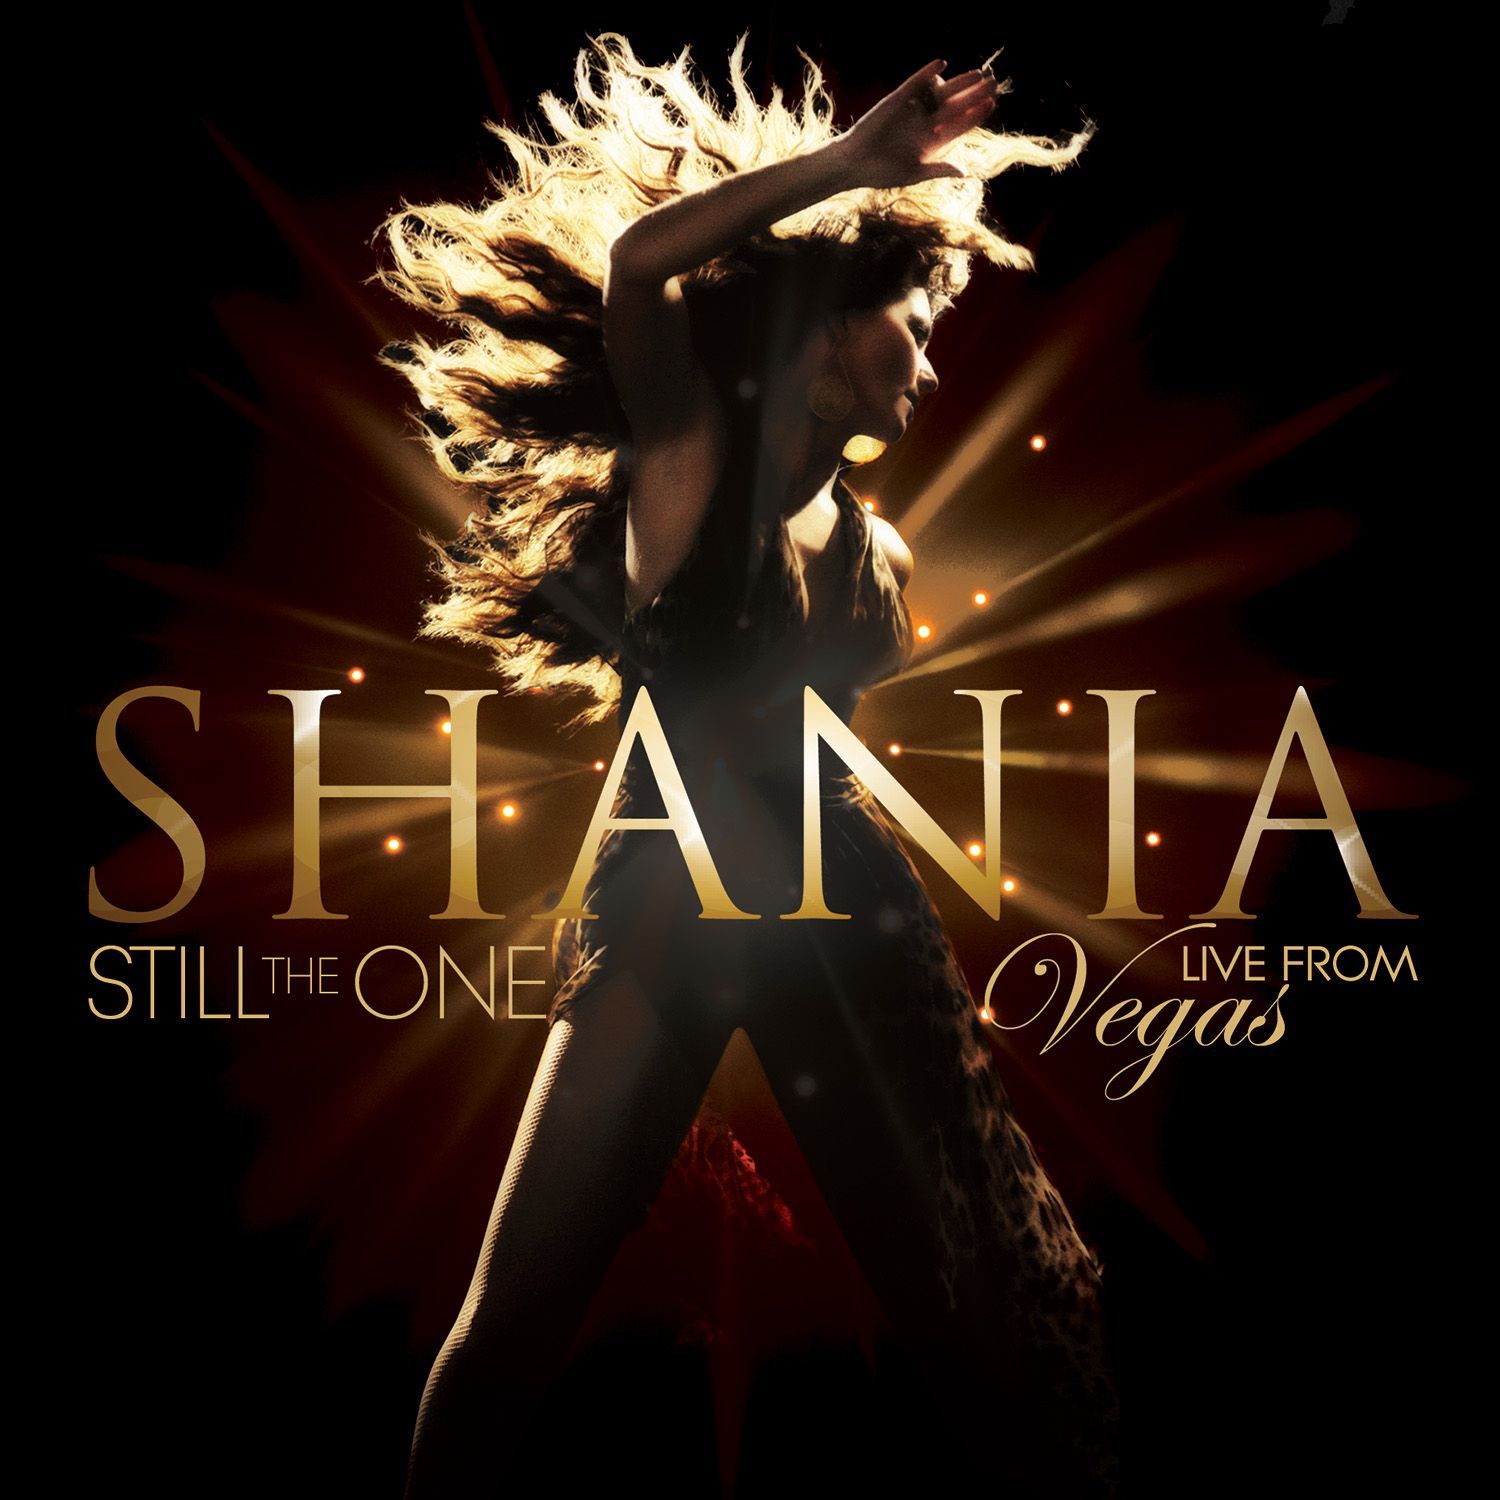 SHANIA TWAIN TO RELEASE “SHANIA: STILL THE ONE LIVE FROM VEGAS” CD AND DVD